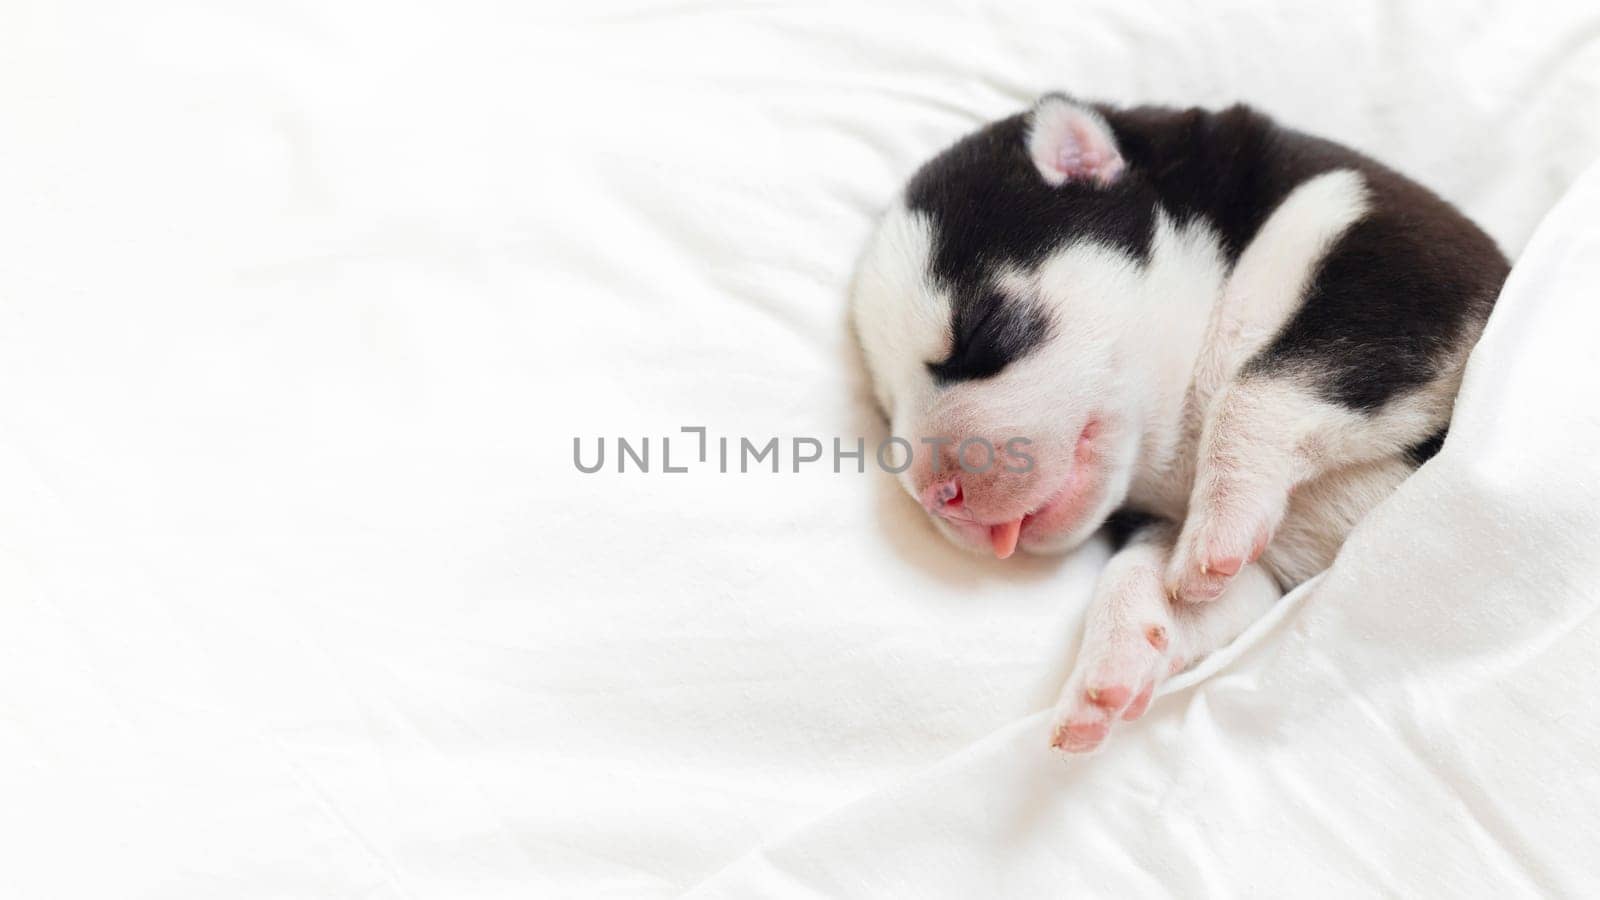 Sleeping Puppy on Soft White Fabric by andreyz